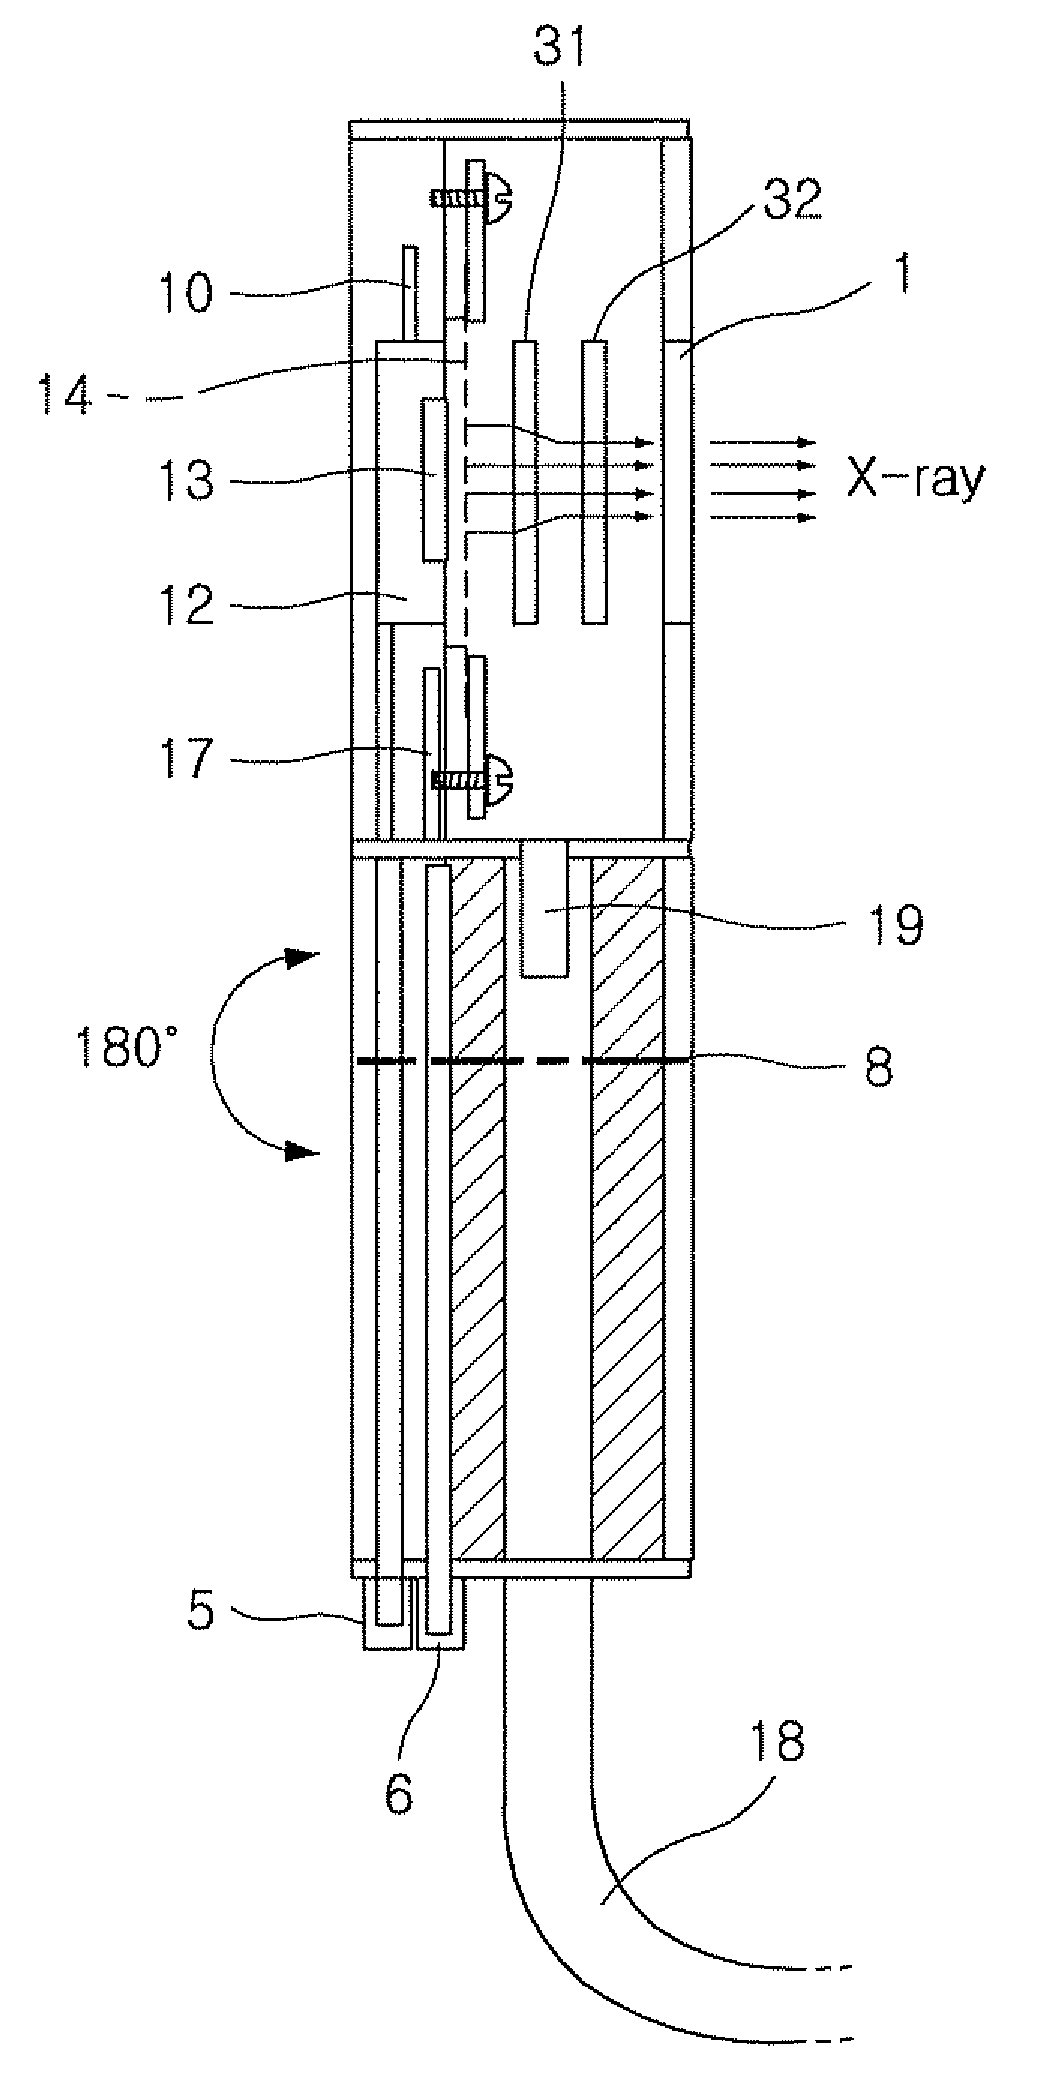 X-Ray System for Dental Diagnosis and Oral Cancer Therapy Based on Nano-Material and Method Thereof